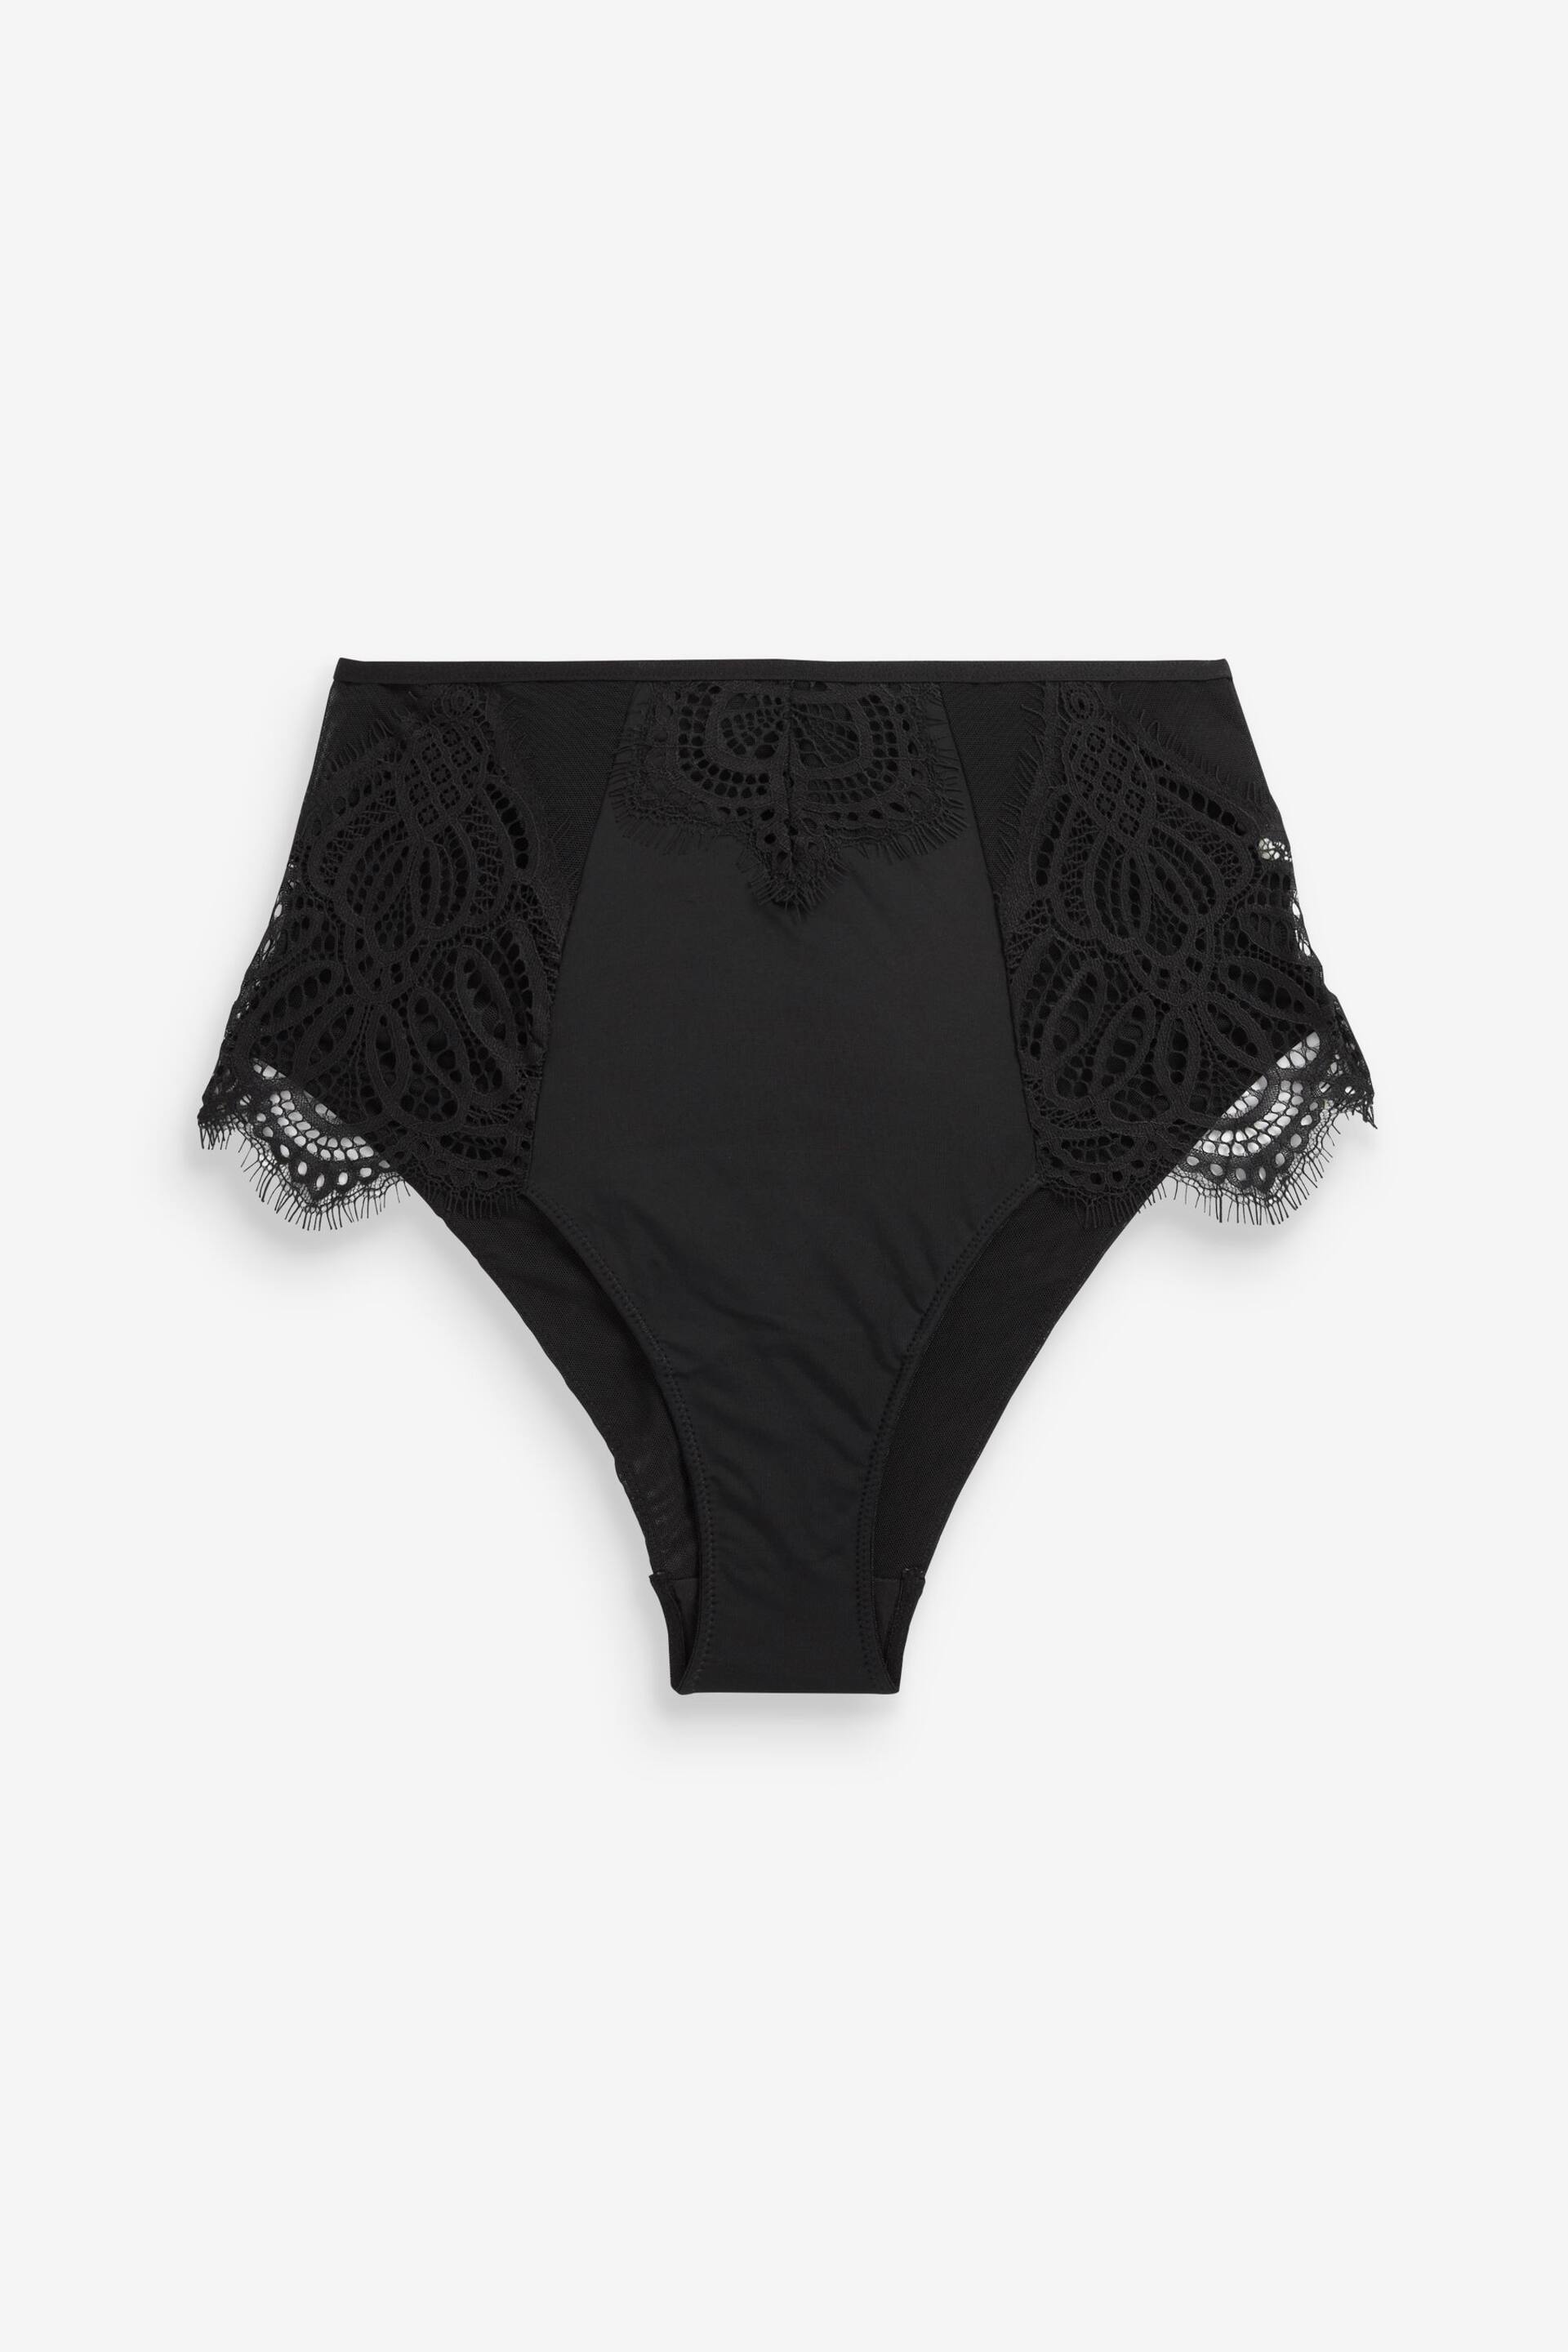 B by Ted Baker Tummy Control Lace Briefs - Image 7 of 8